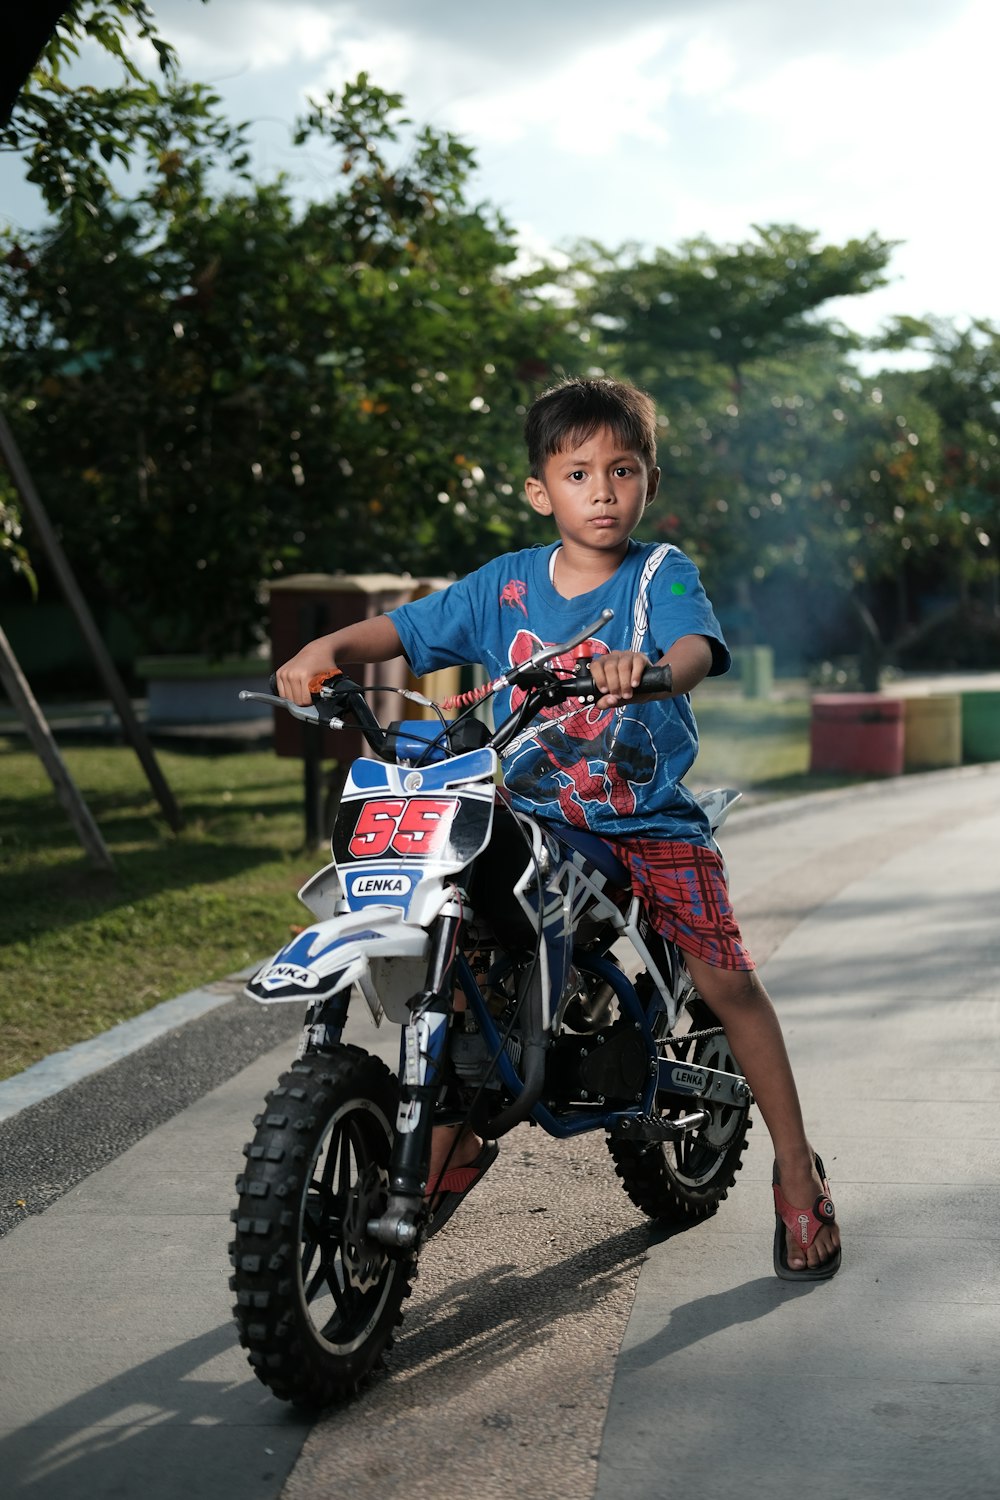 boy in blue t-shirt riding on motorcycle